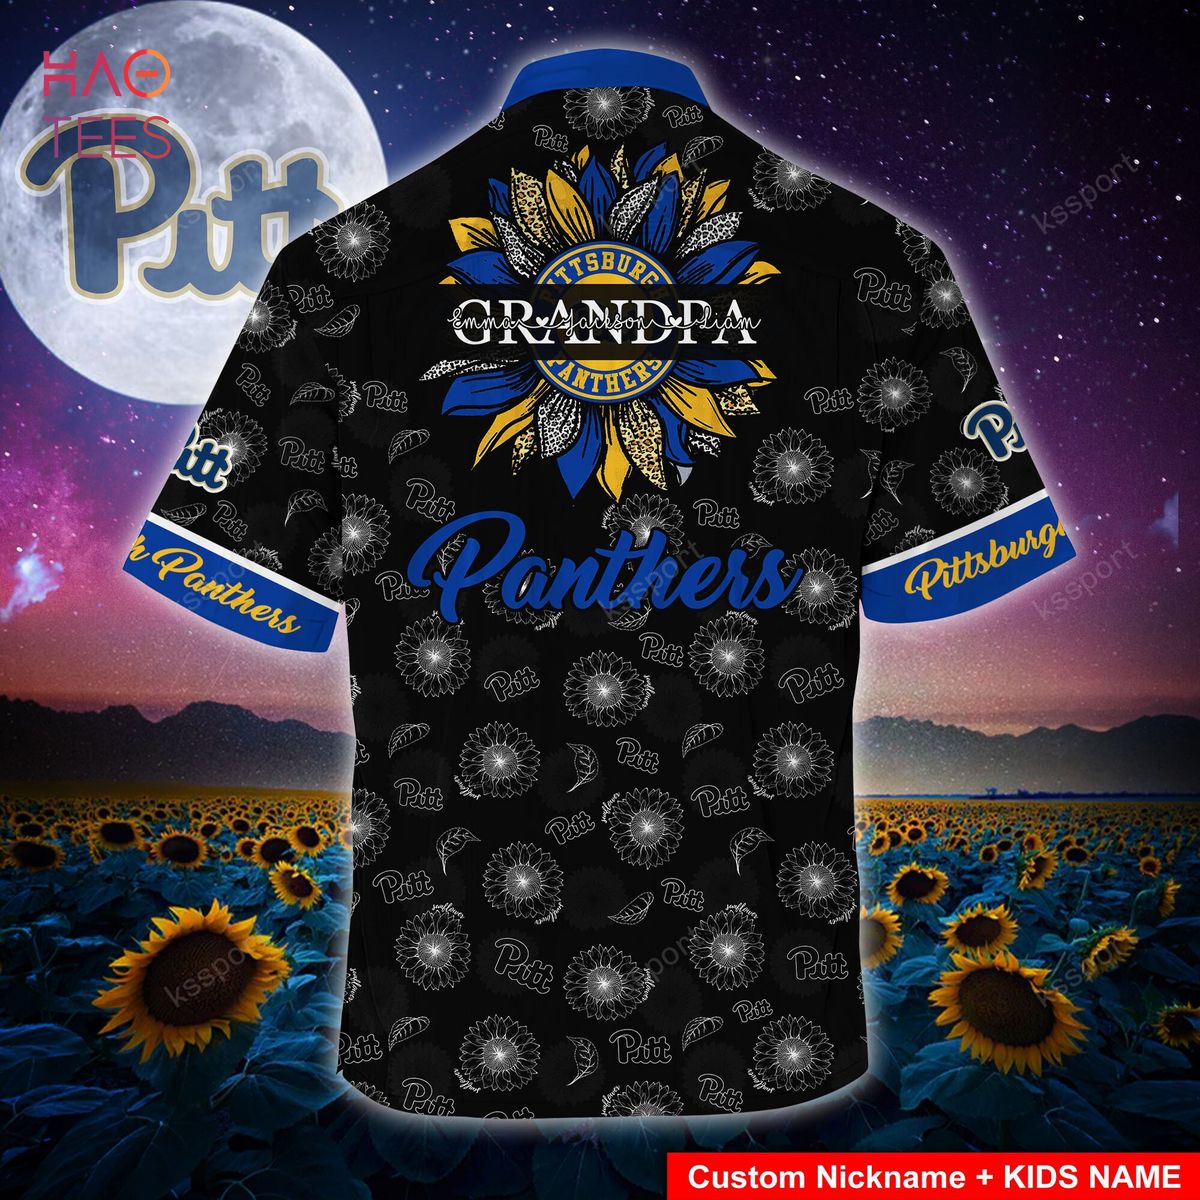 [Available] Pittsburgh Panthers Hawaiian Shirt Limited Edition